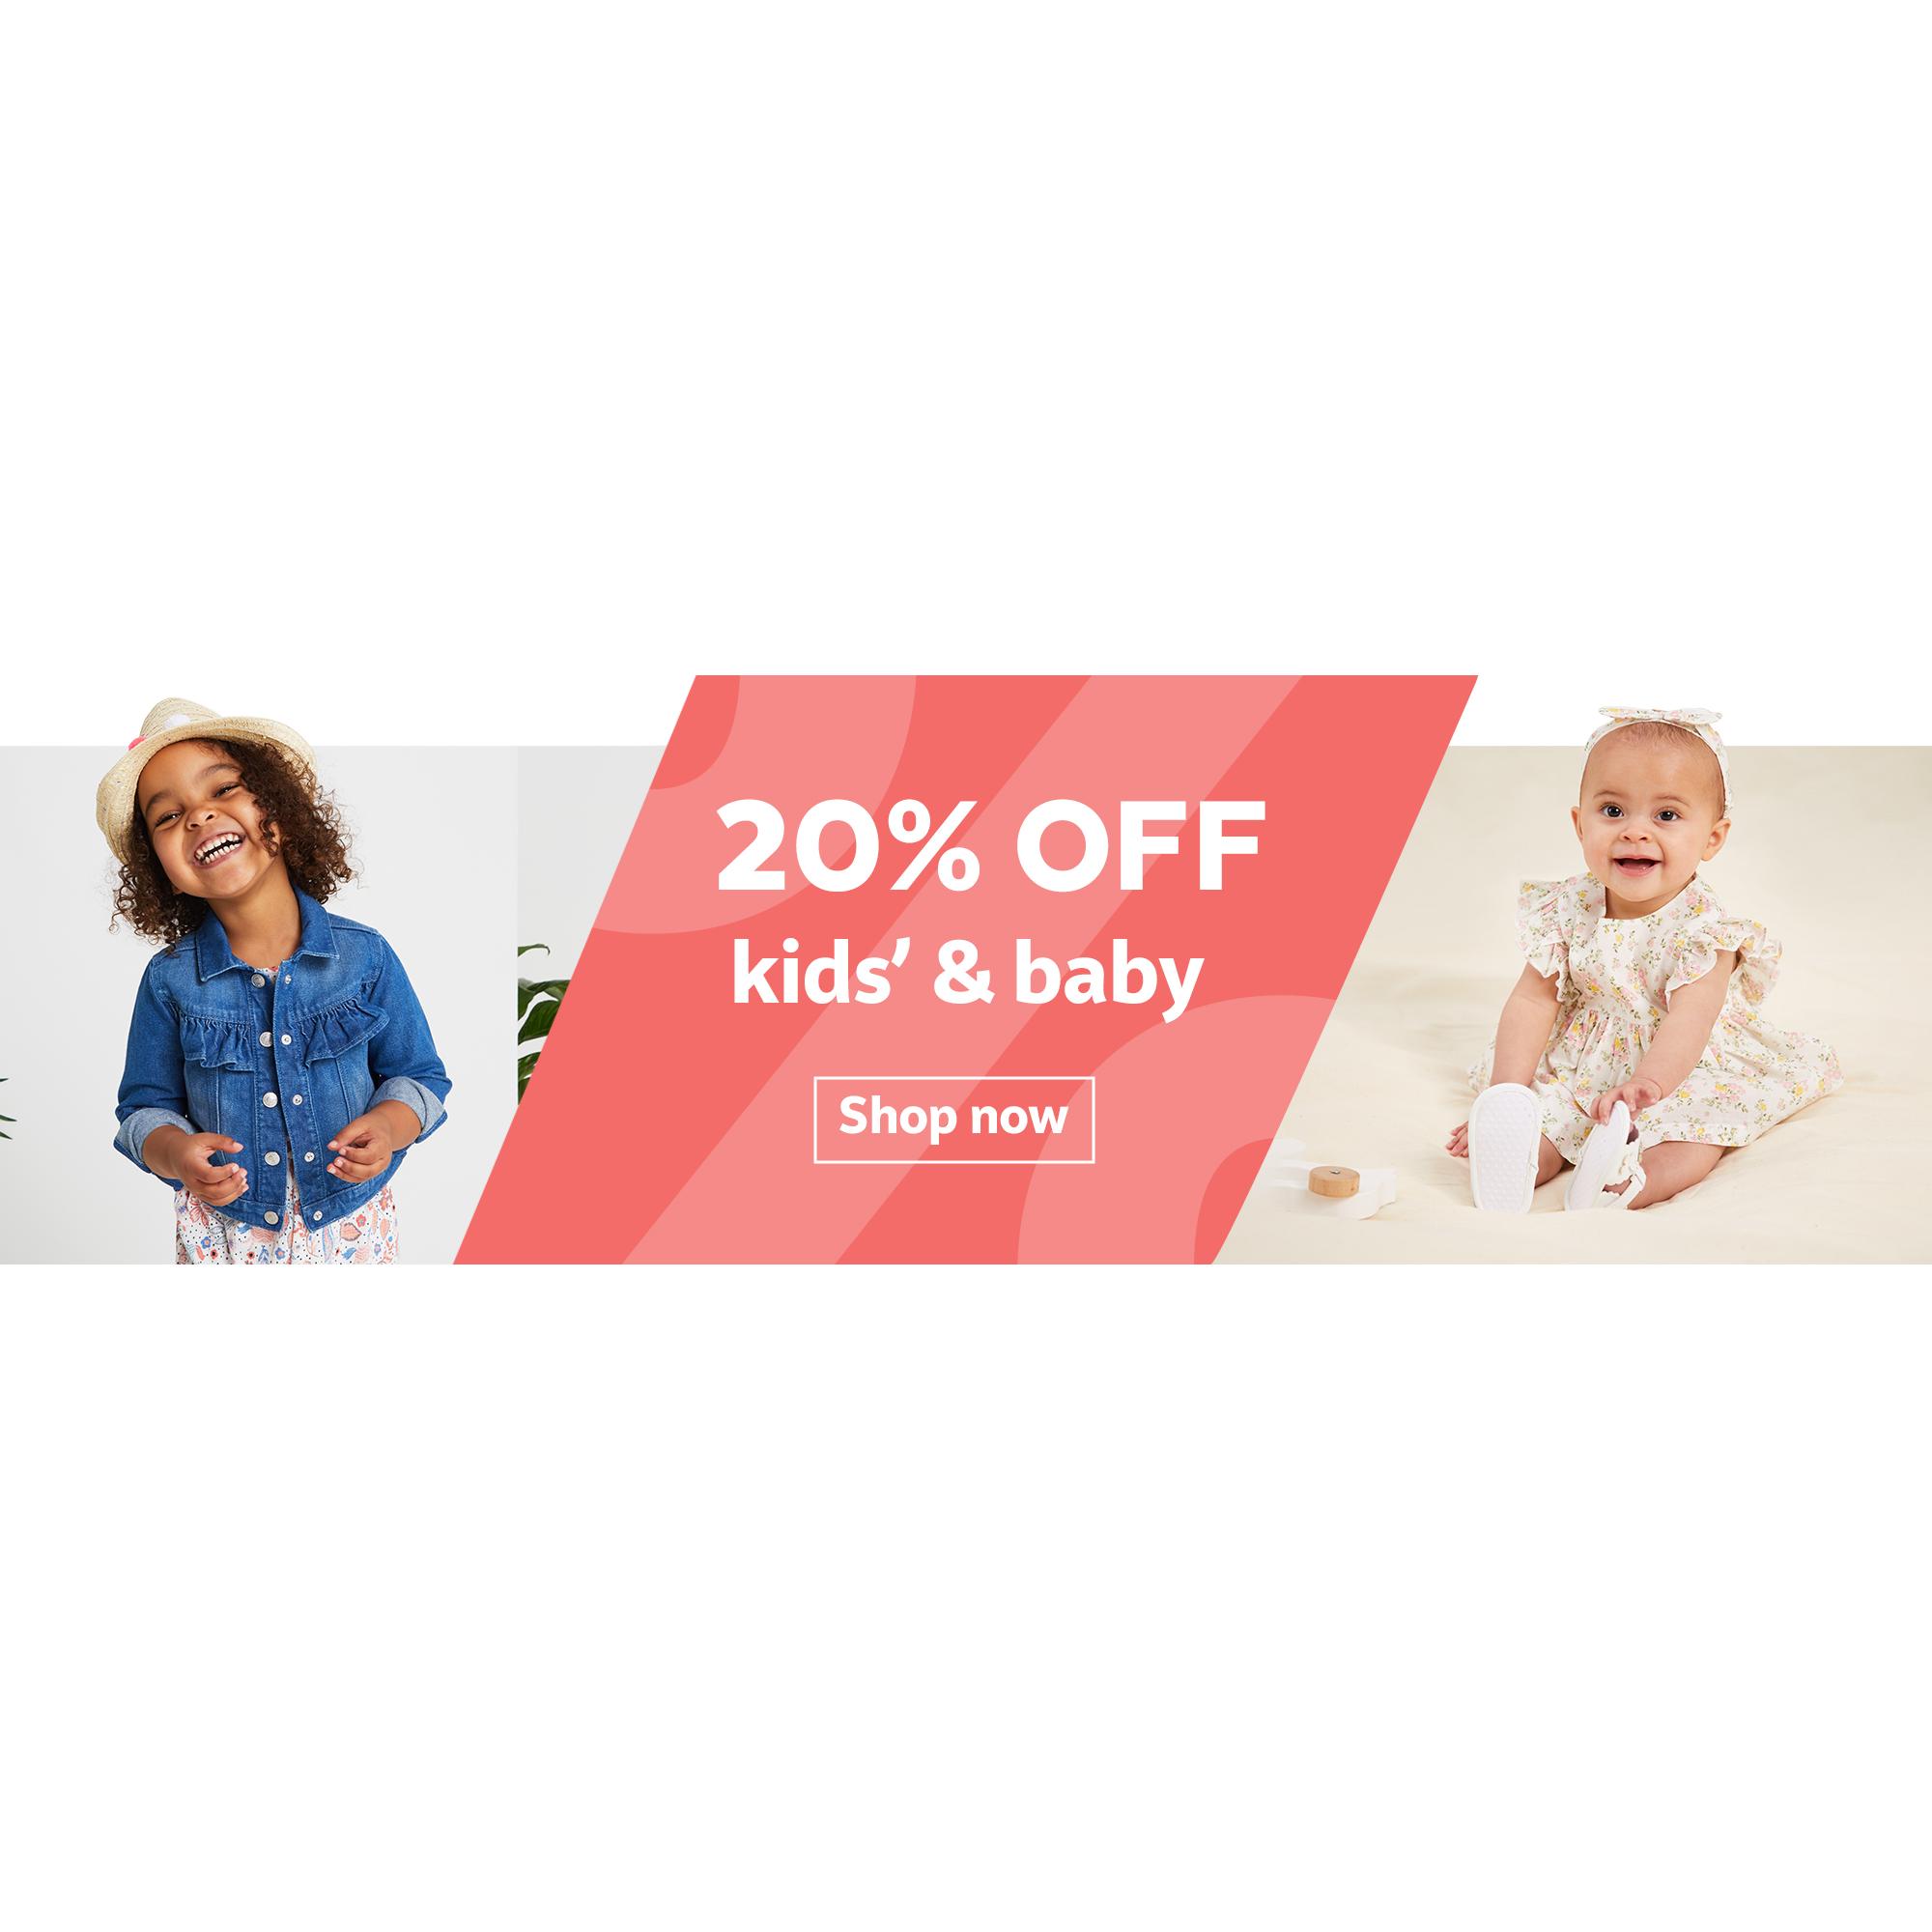 20% off kids' & baby. Excludes wetsuits, wetshoes, jewellery and watches. Ends 23:59 on 21st May. Available online and instore. T&Cs apply.